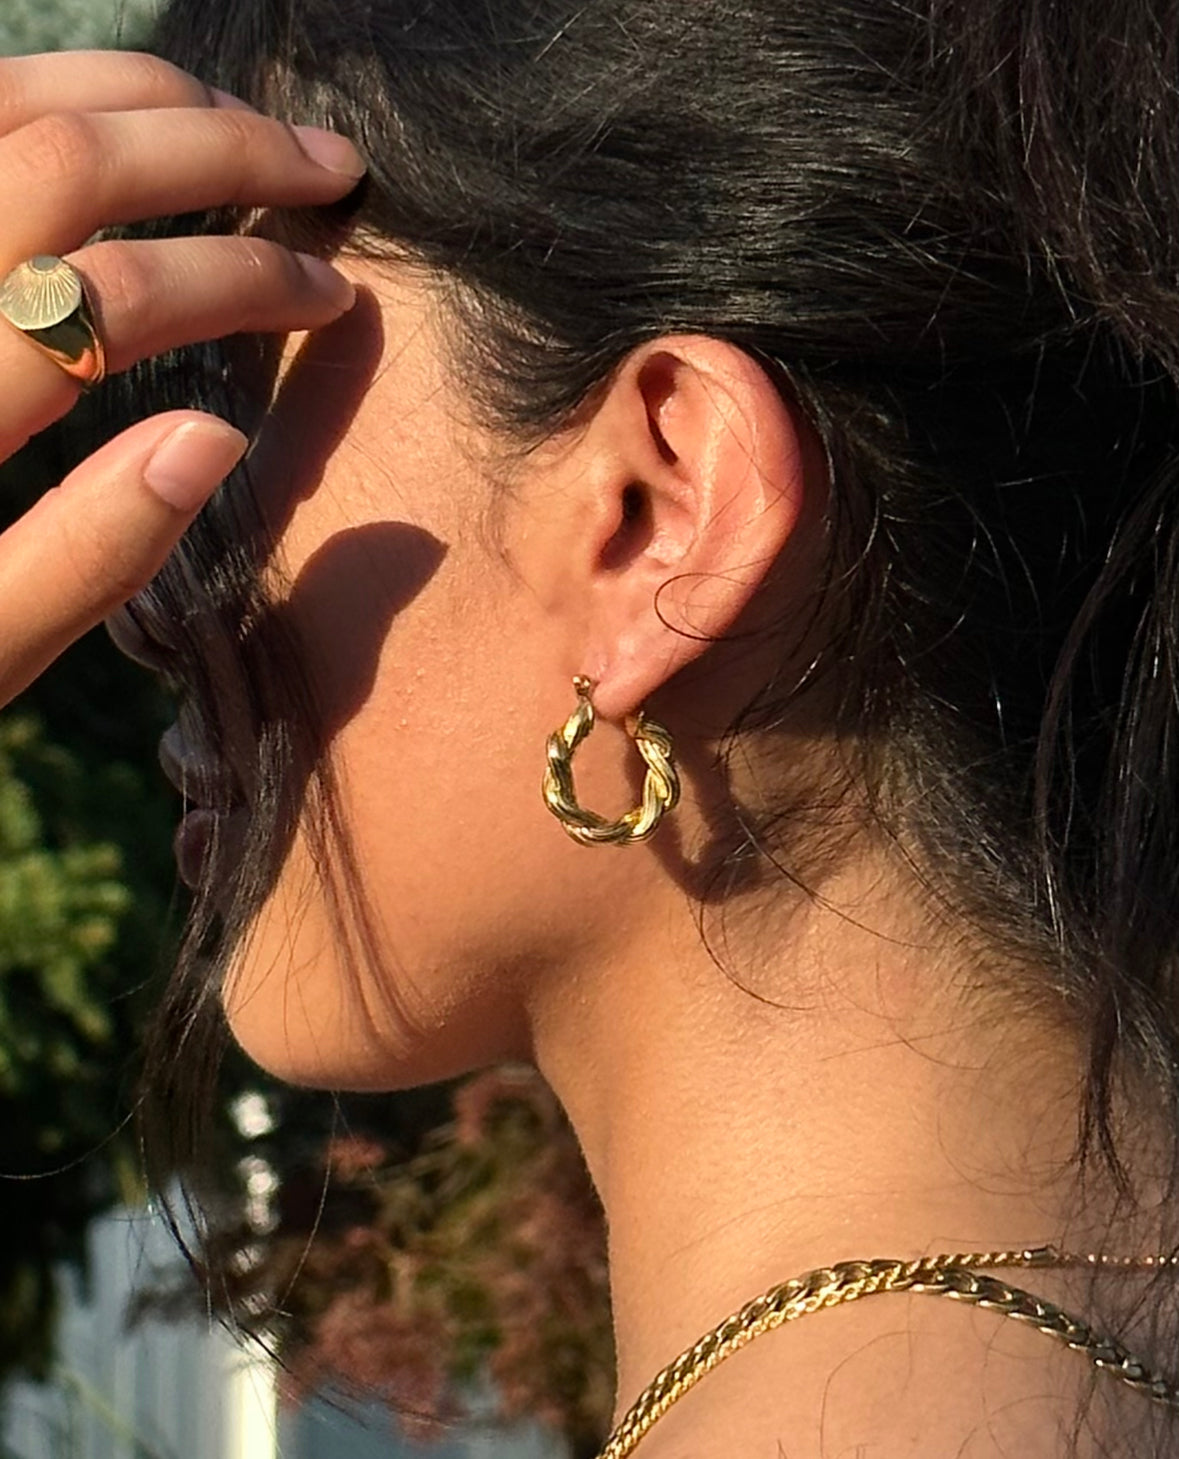 Naomi Twisted Hoops | 18k Gold Plated